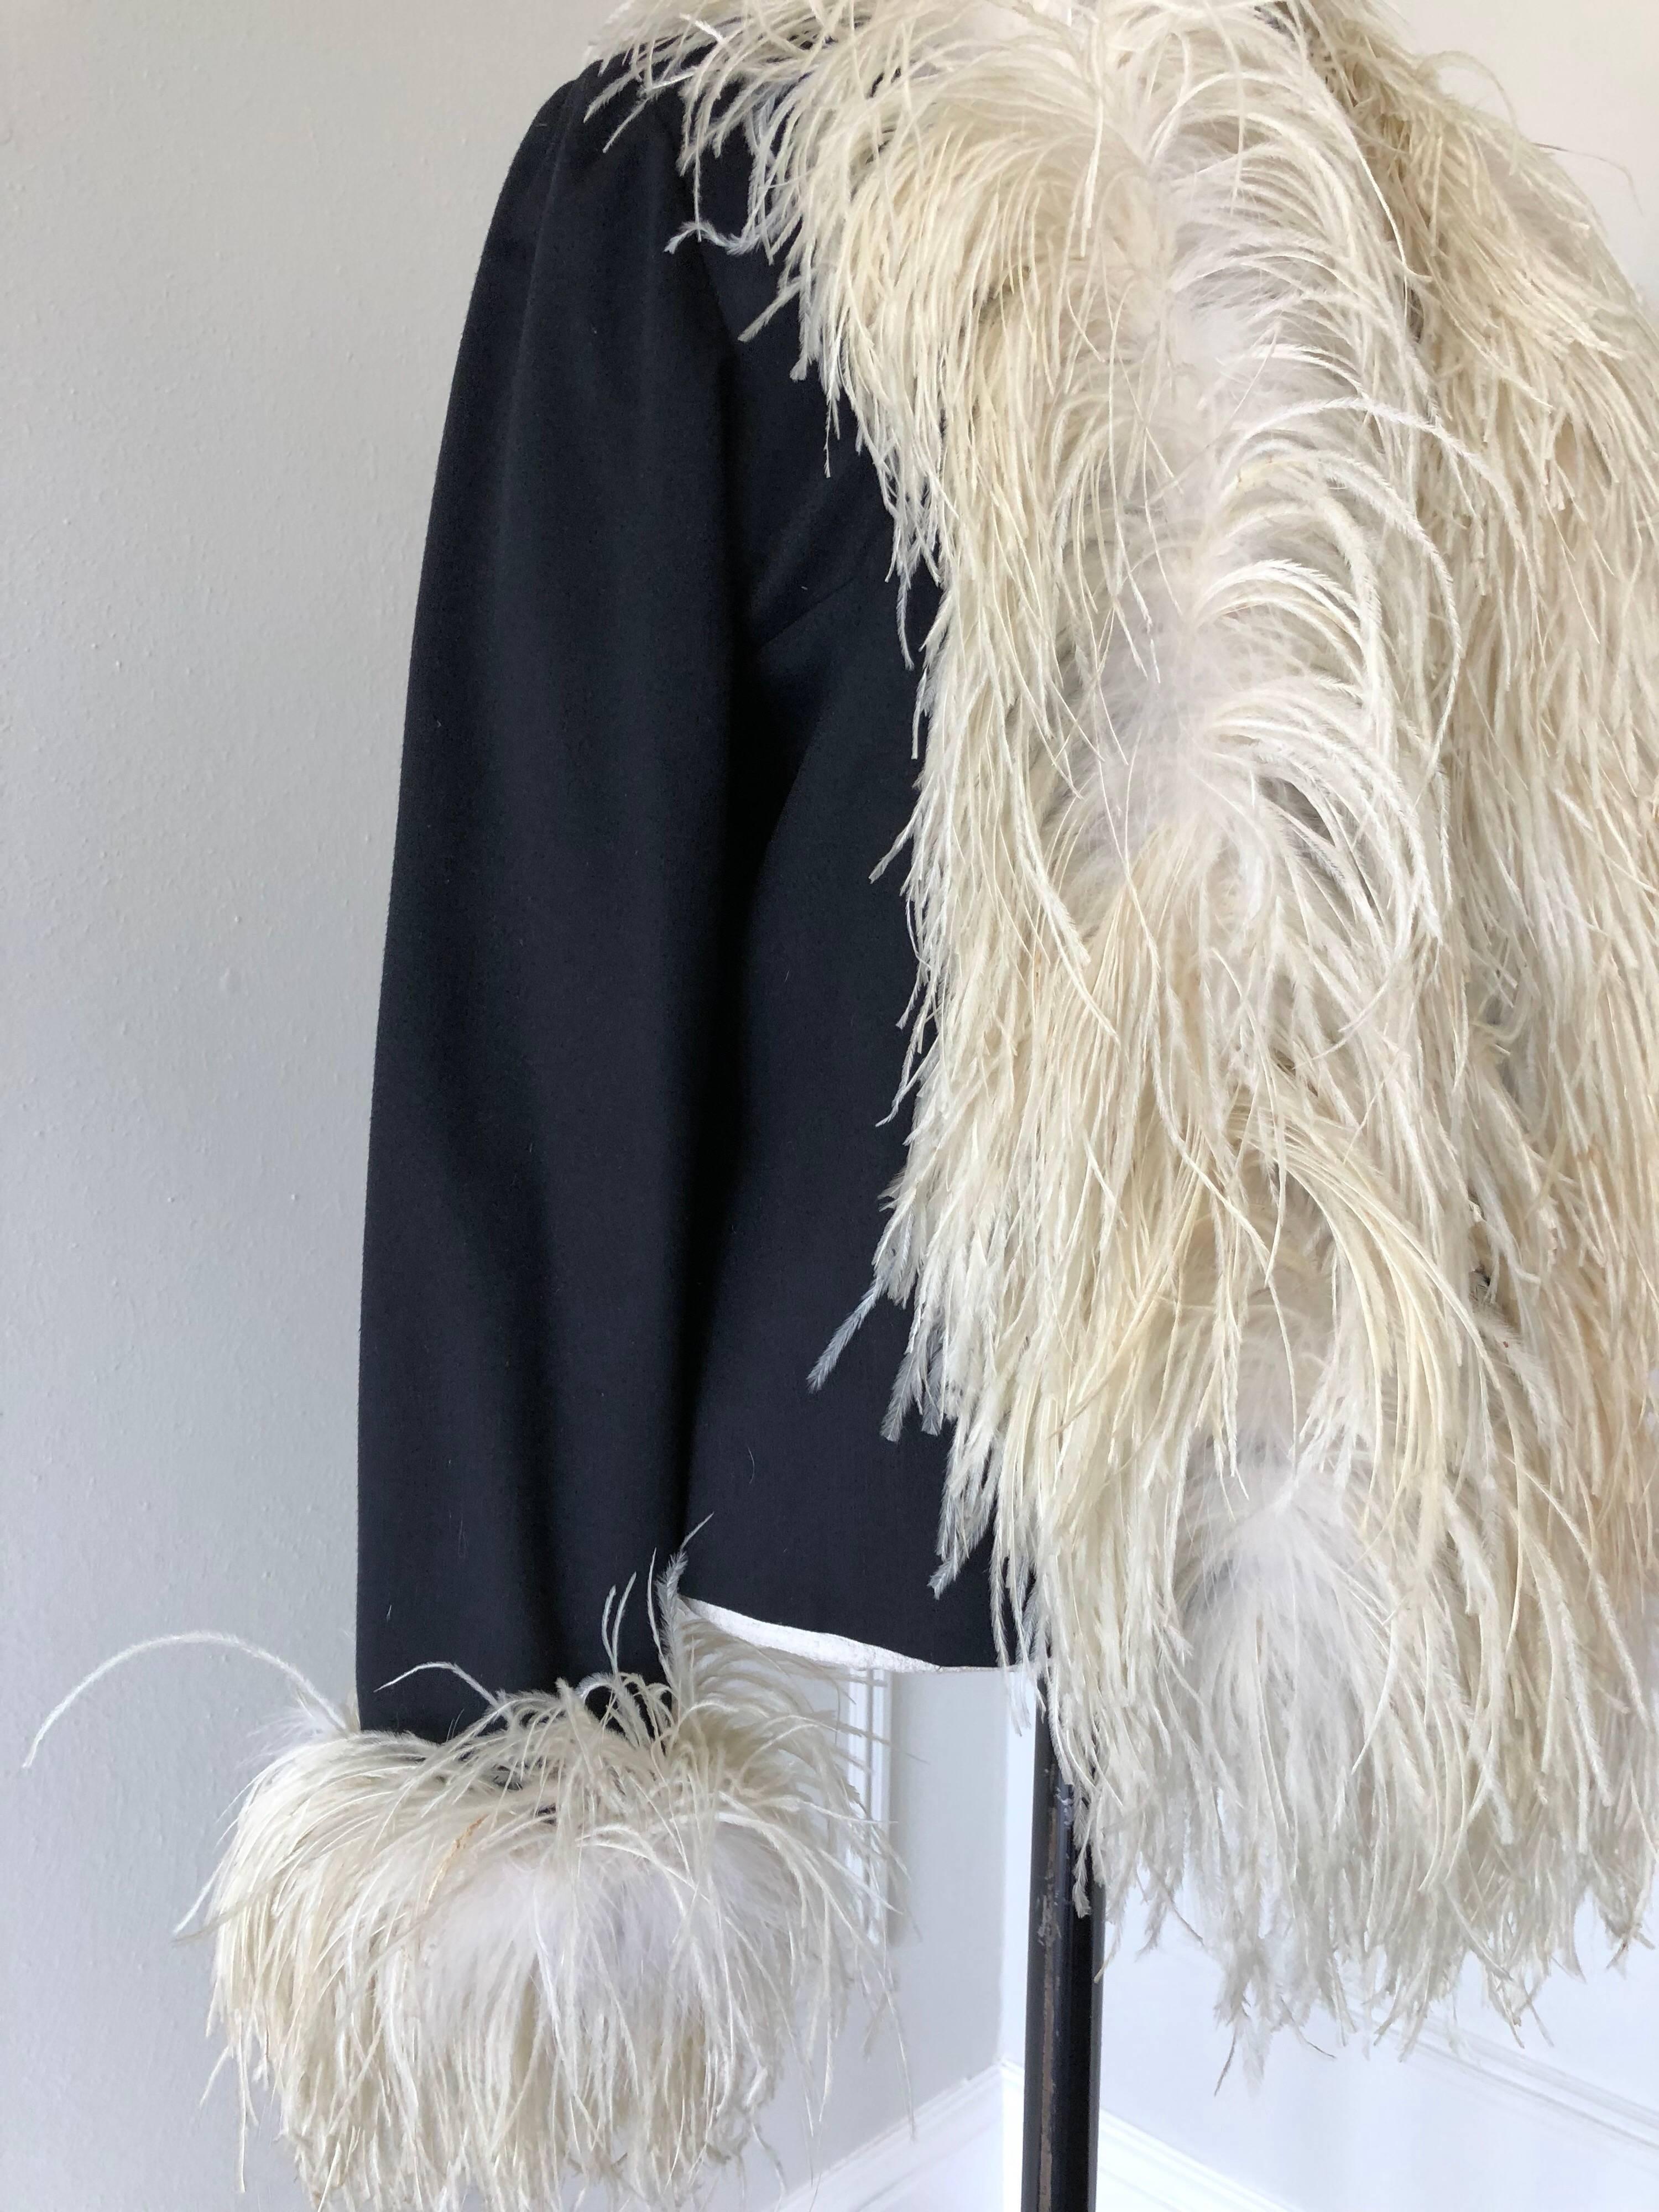 A fabulous 1960s black wool and cashmere felted jacket in a boxy cut, lined with extravagant amounts of cream color ostrich feathers trimming front neckline to hem and cuffs!  